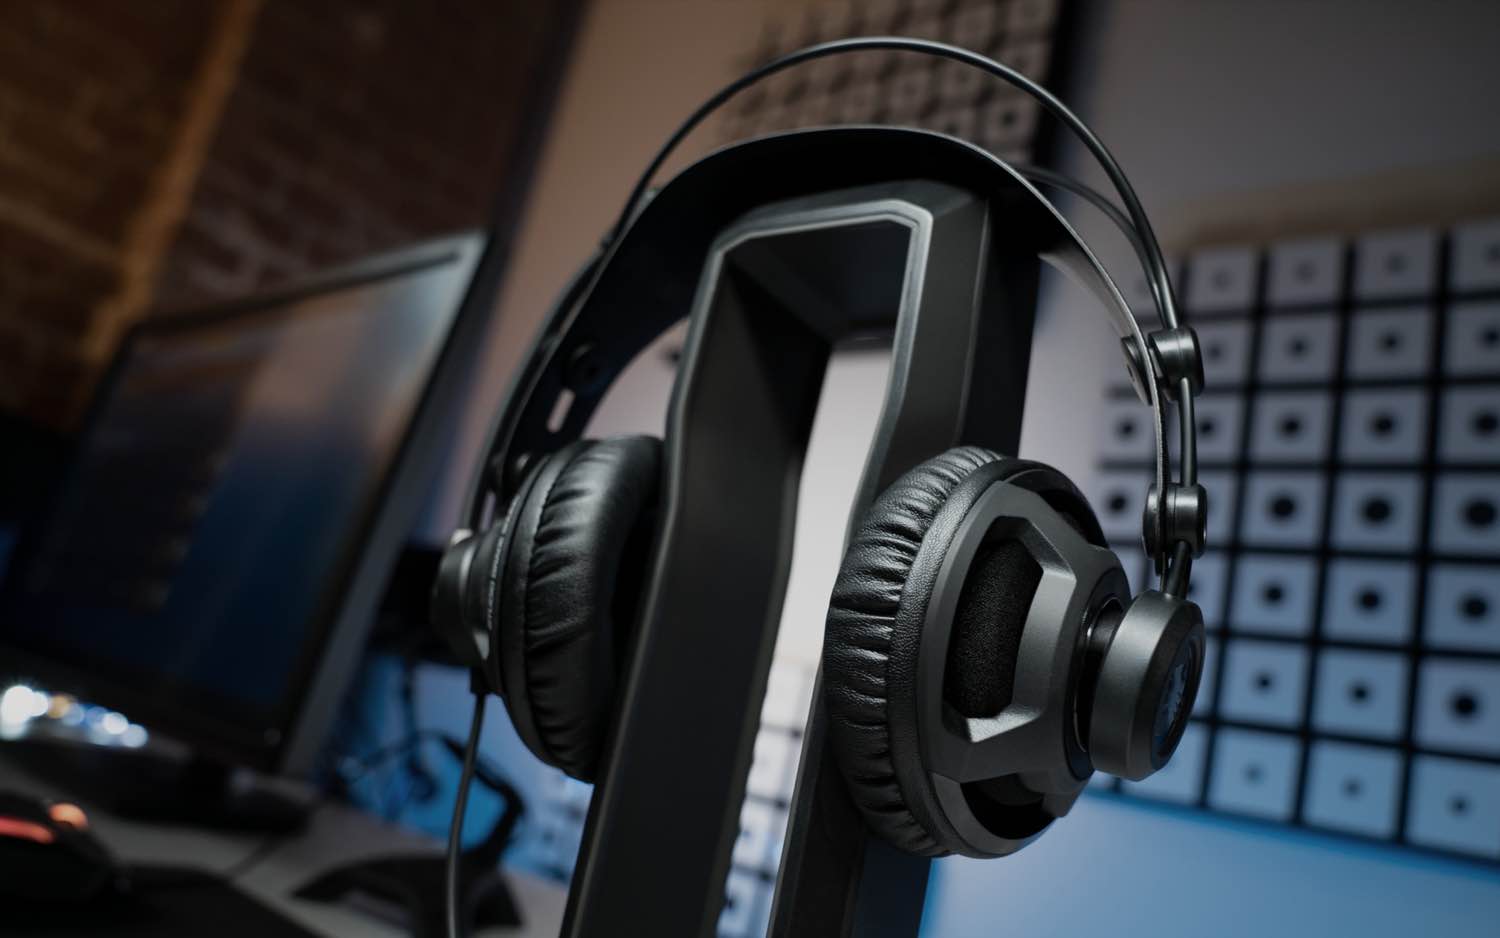 Roccat Renga Boost Review: A Solid $60 Gaming Headset | Tom's Guide